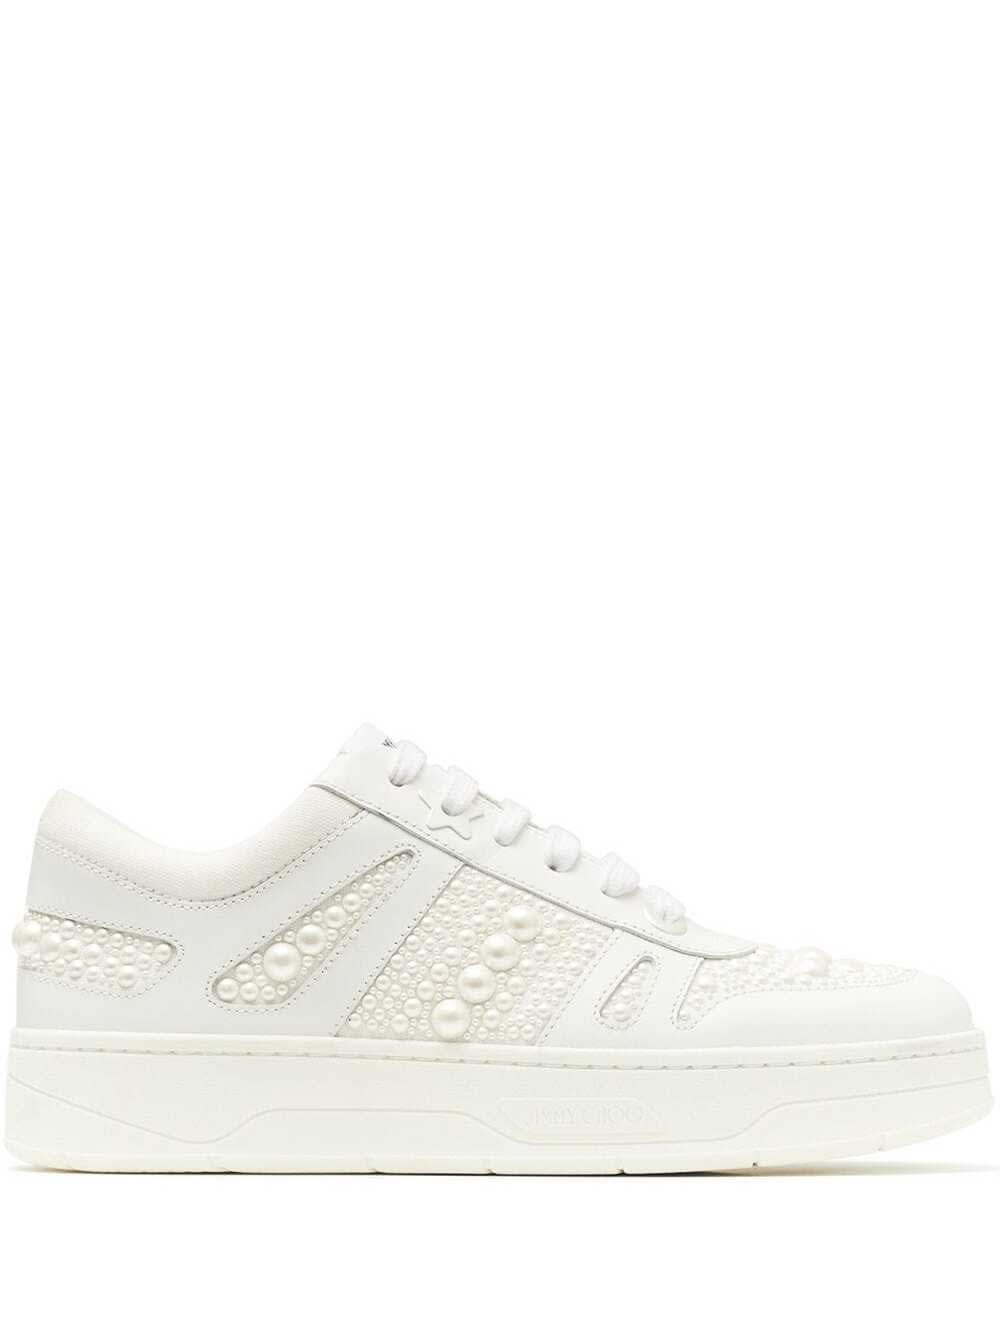 Jimmy Choo Hawaii Sneakers In White Leather With Pearls